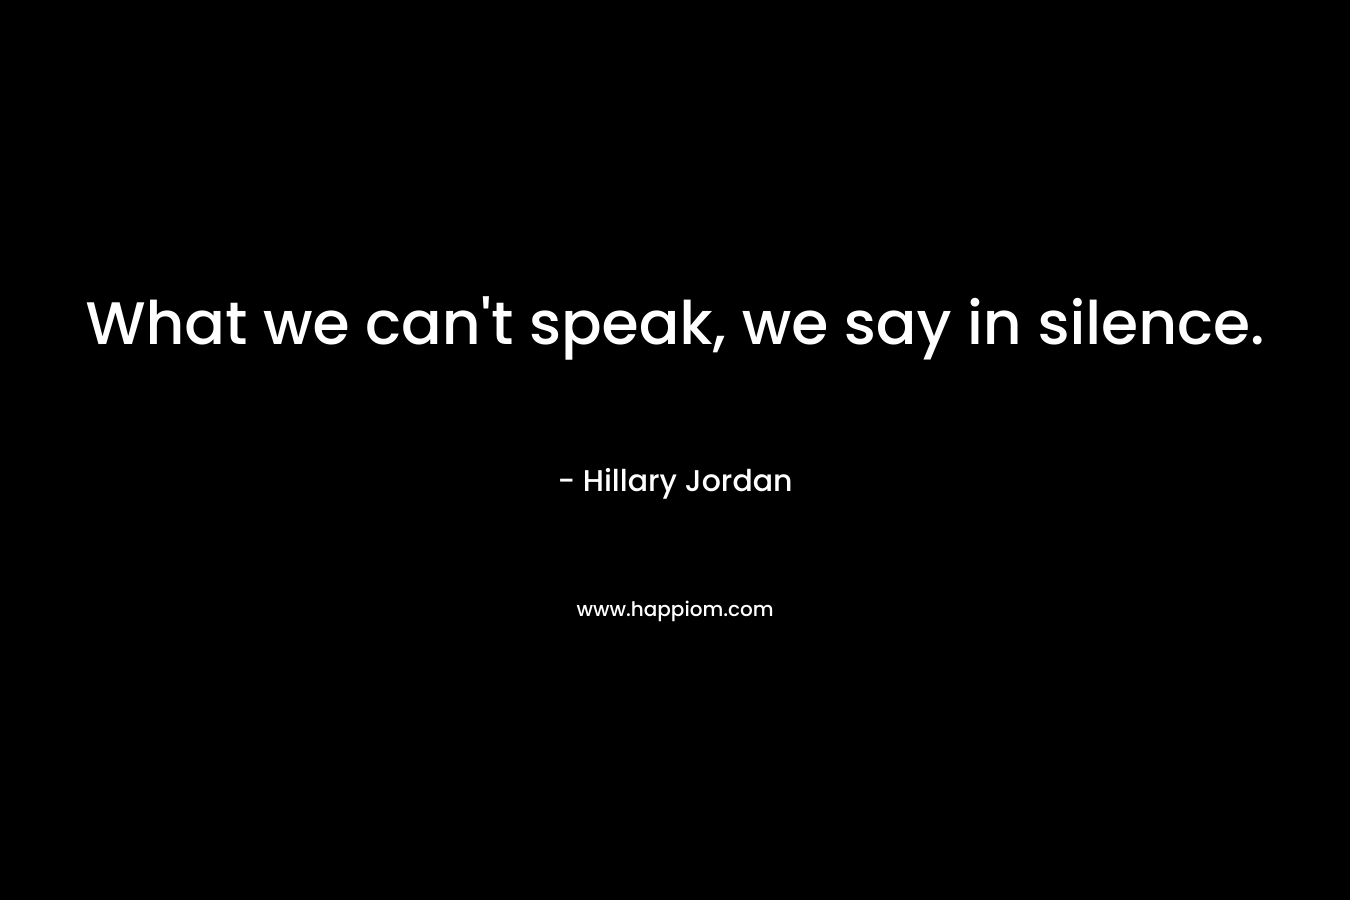 What we can’t speak, we say in silence. – Hillary Jordan